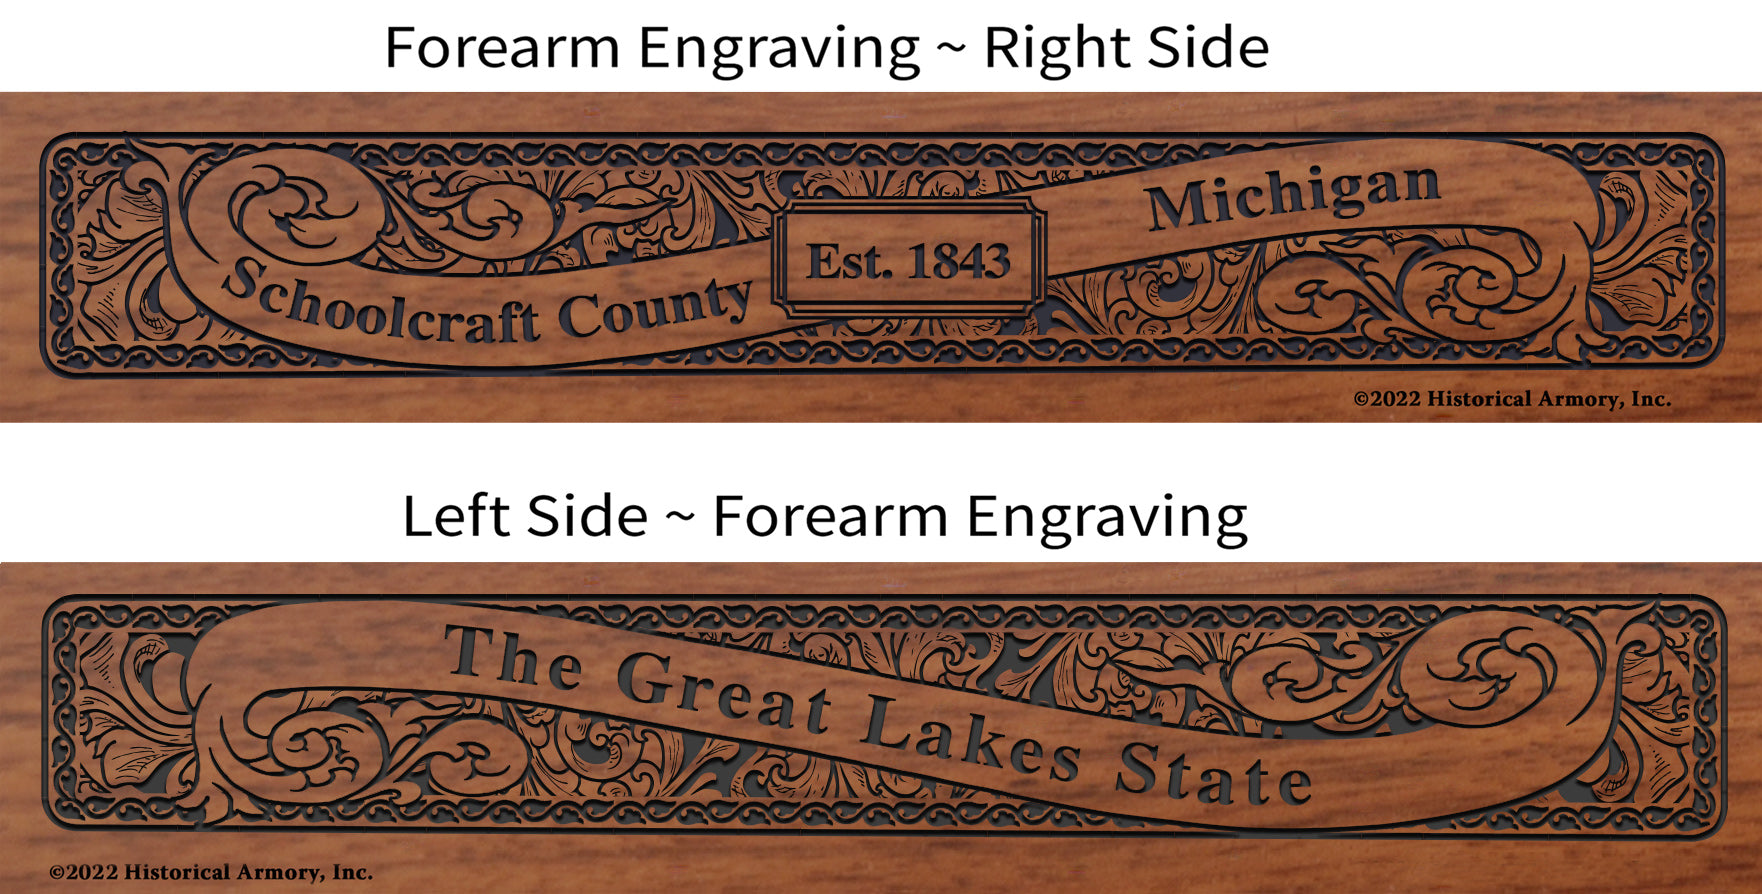 Schoolcraft County Michigan Engraved Rifle Forearm